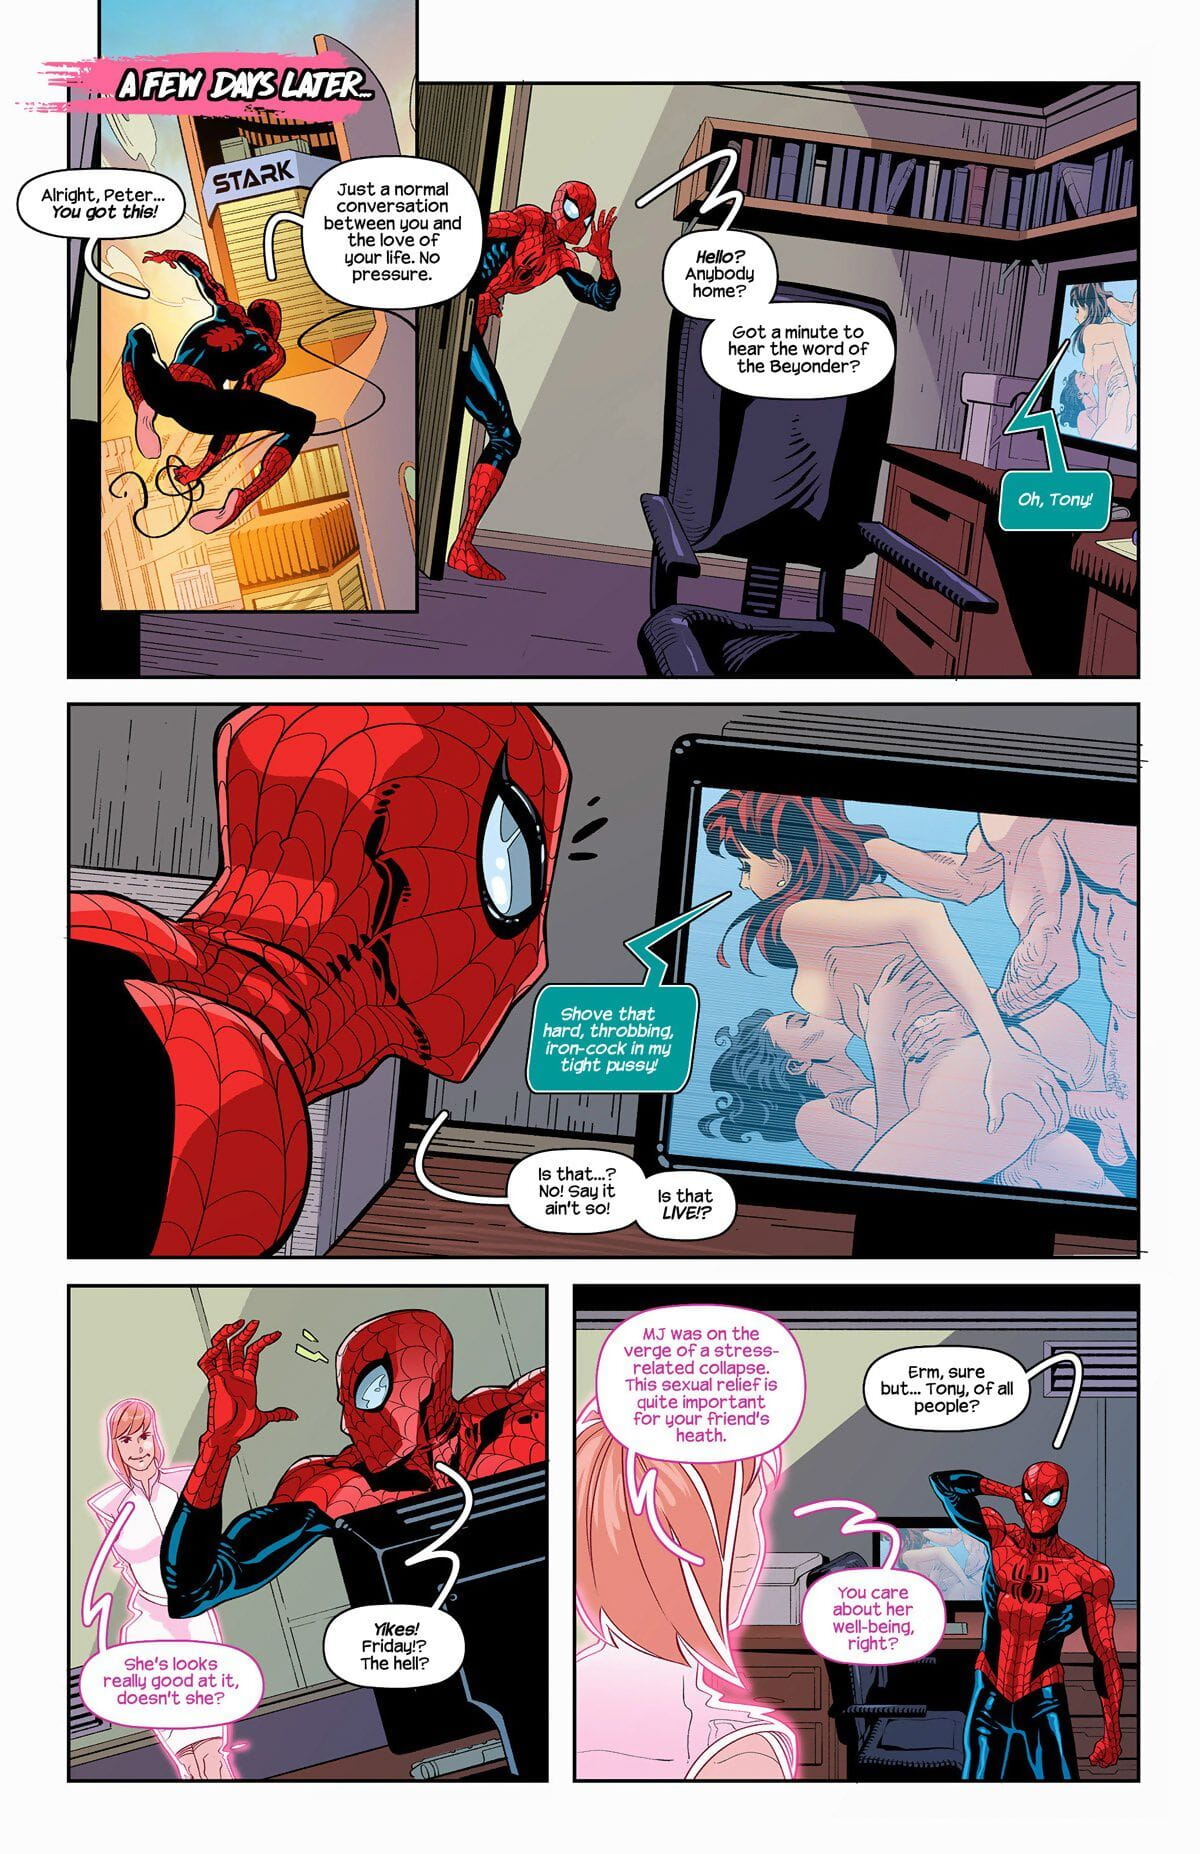 Tracy scops invincible Fer spider – page 1